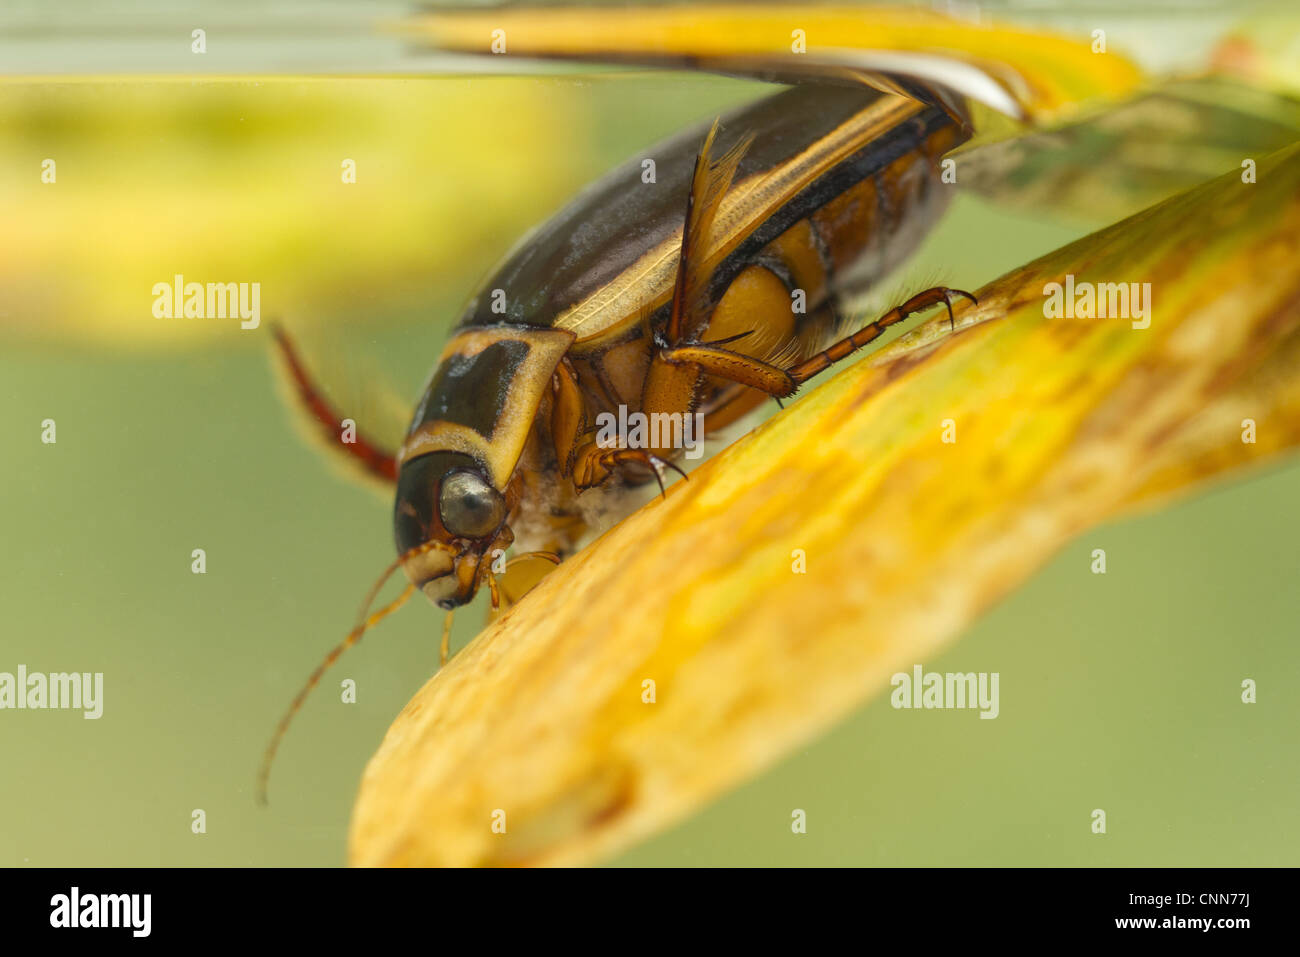 Great Diving Beetle (Dytiscus marginalis) adult, at surface of water, Derbyshire, England, july Stock Photo